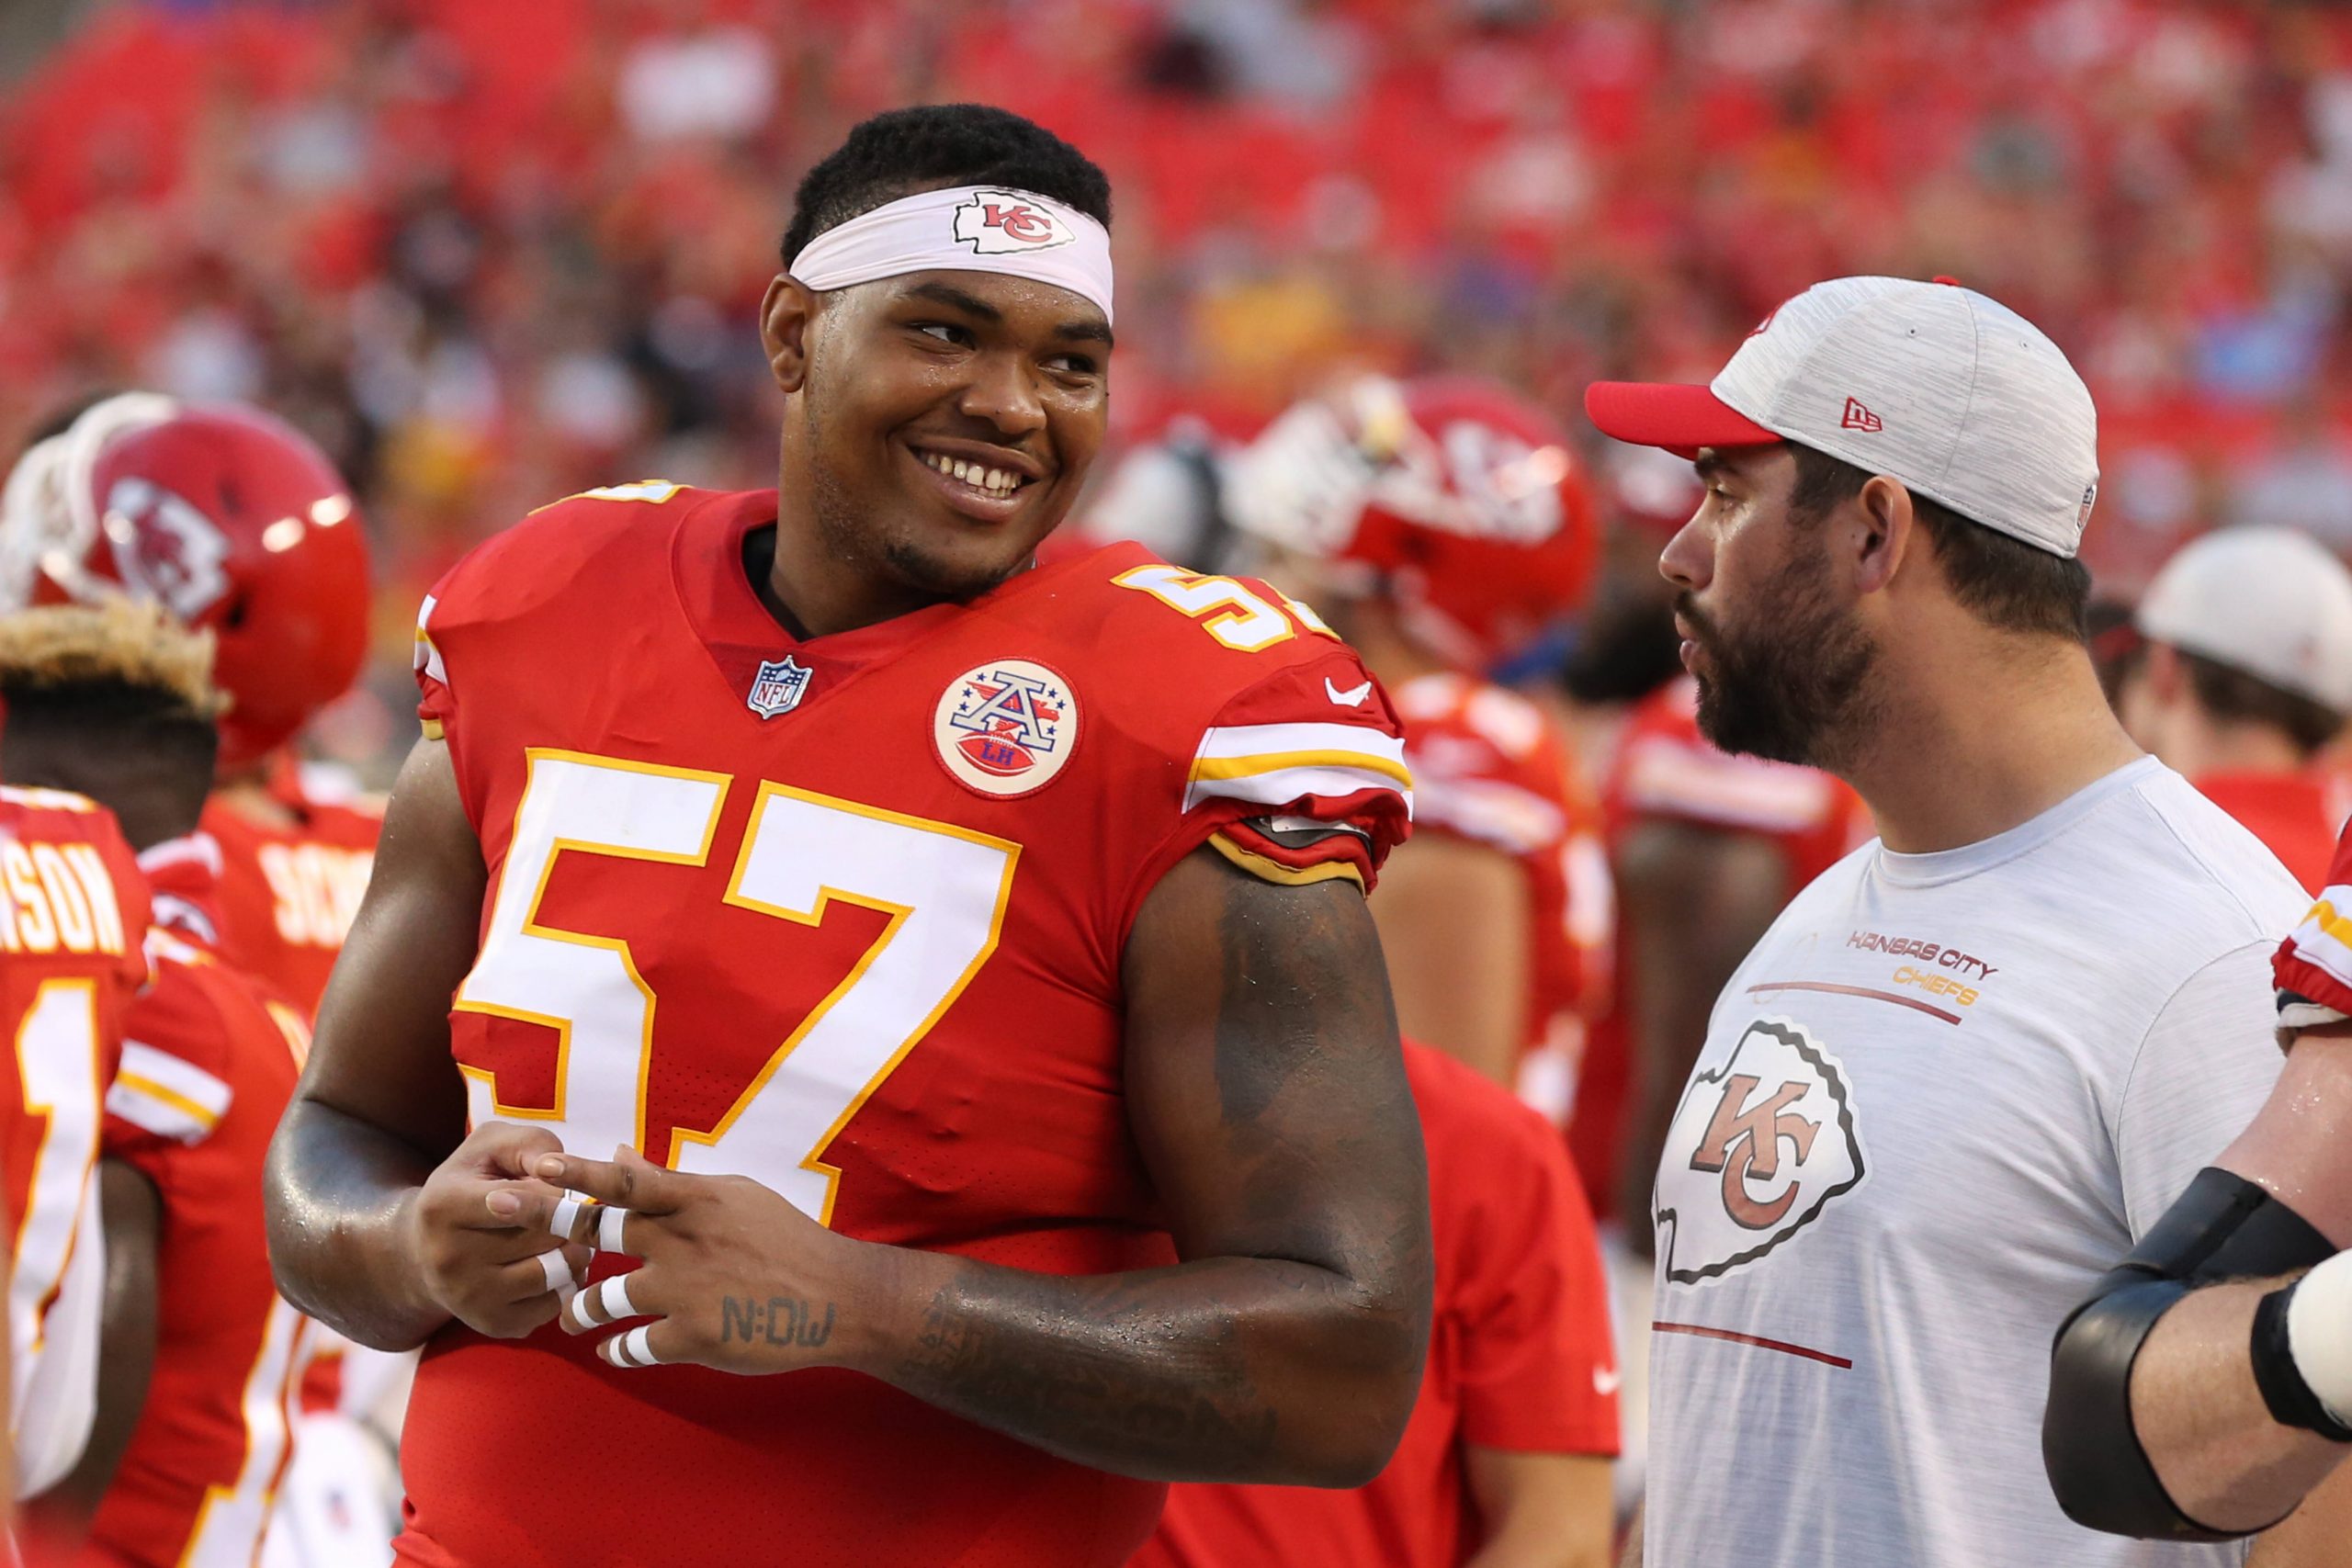 KANSAS CITY, MO - AUGUST 27: Kansas City Chiefs offensive tackle Orlando Brown 57 on the sidelines during an NFL, American Football Herren, USA preseason game between the Minnesota Vikings and Kansas City Chiefs on Aug 27, 2021 at GEHA Field at Arrowhead Stadium in Kansas City, MO. Photo by Scott Winters/Icon Sportswire NFL: AUG 27 Preseason - Vikings at Chiefs Icon2108270180